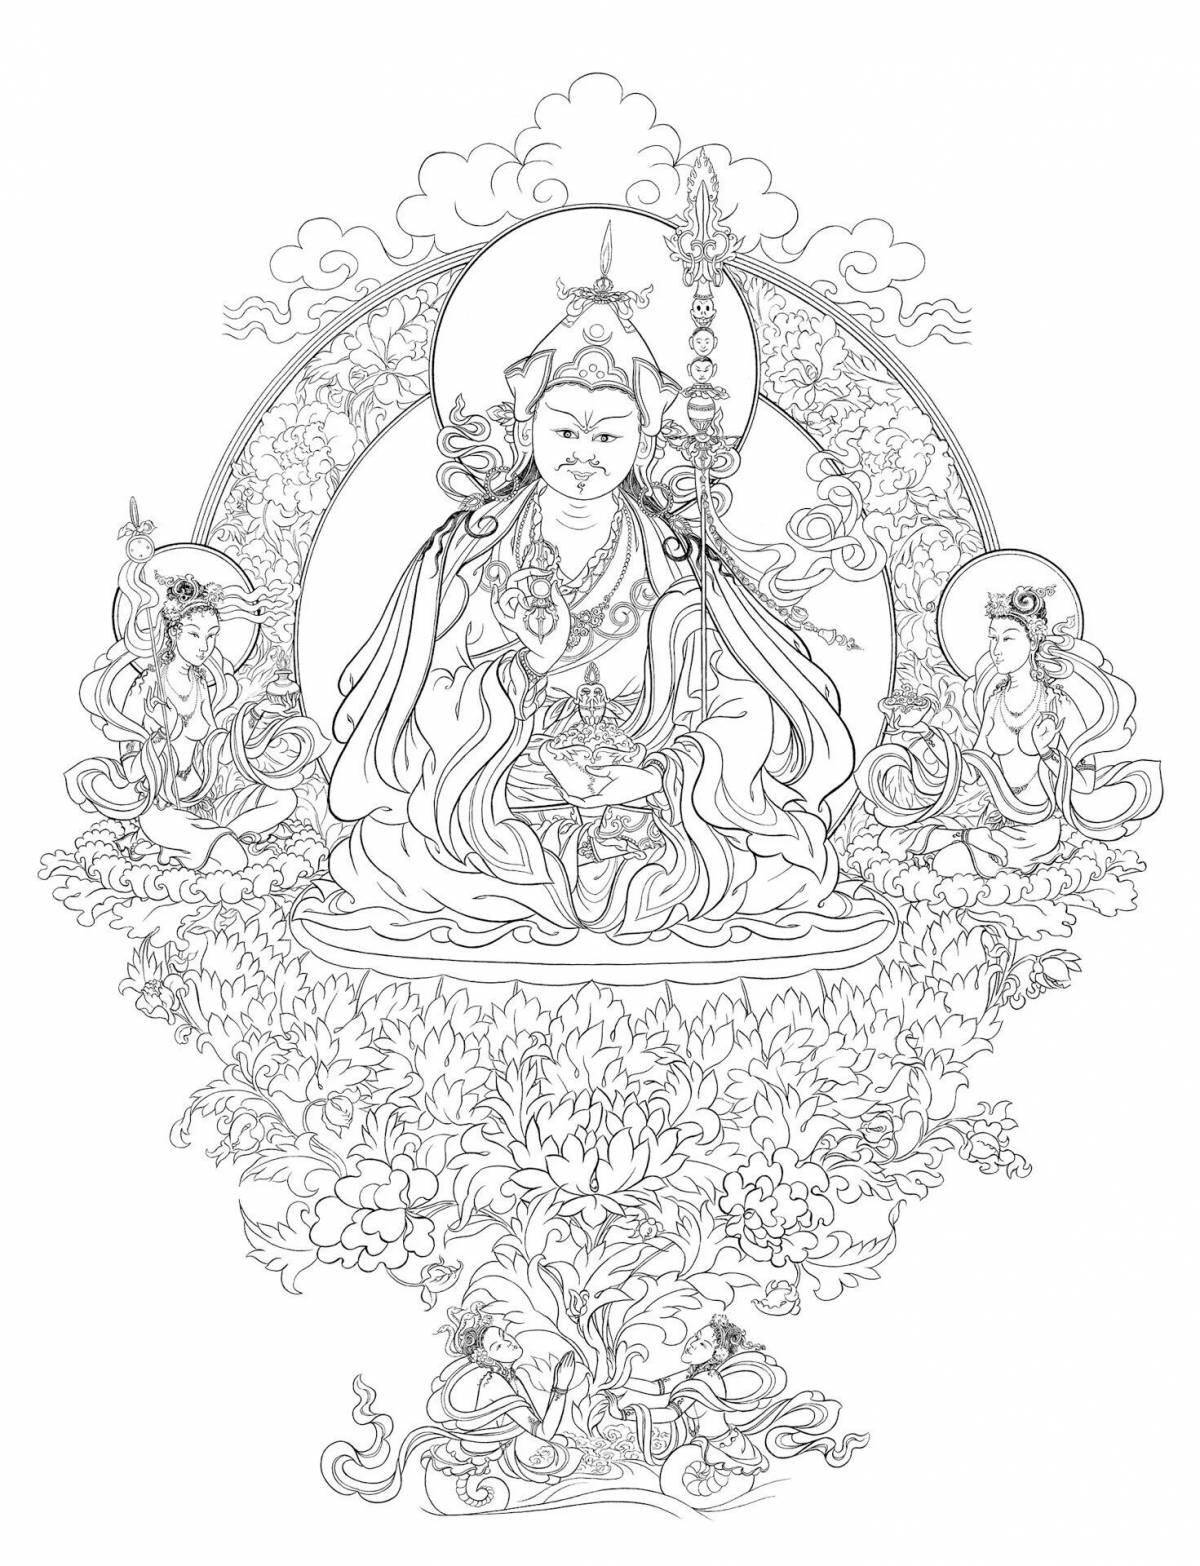 Coloring page serene buddhism